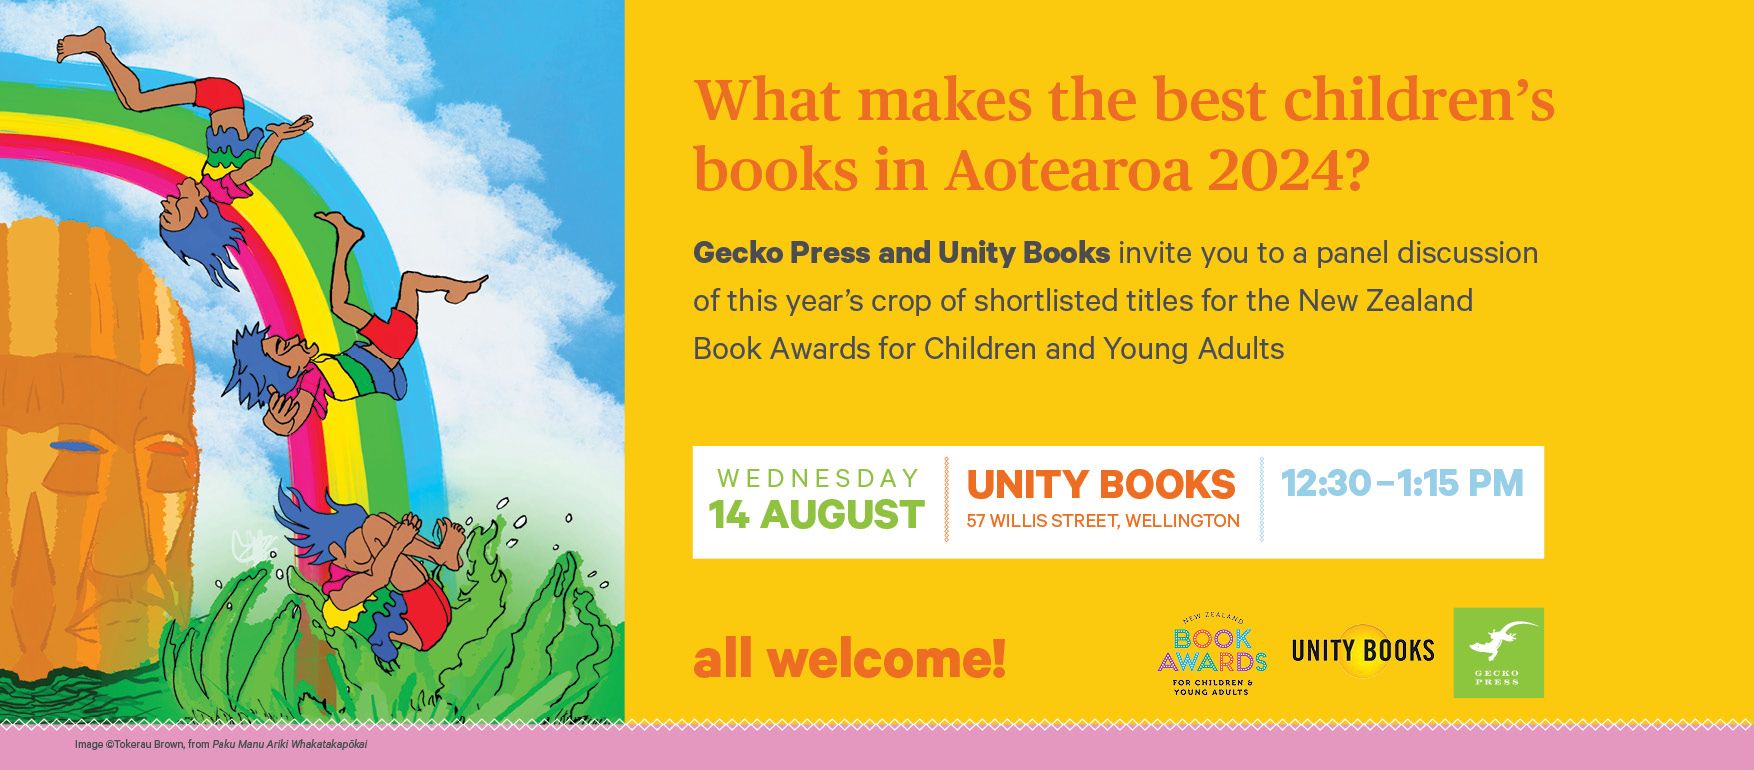 Panel Discussion: What makes the best children's books in Aotearoa 2024?